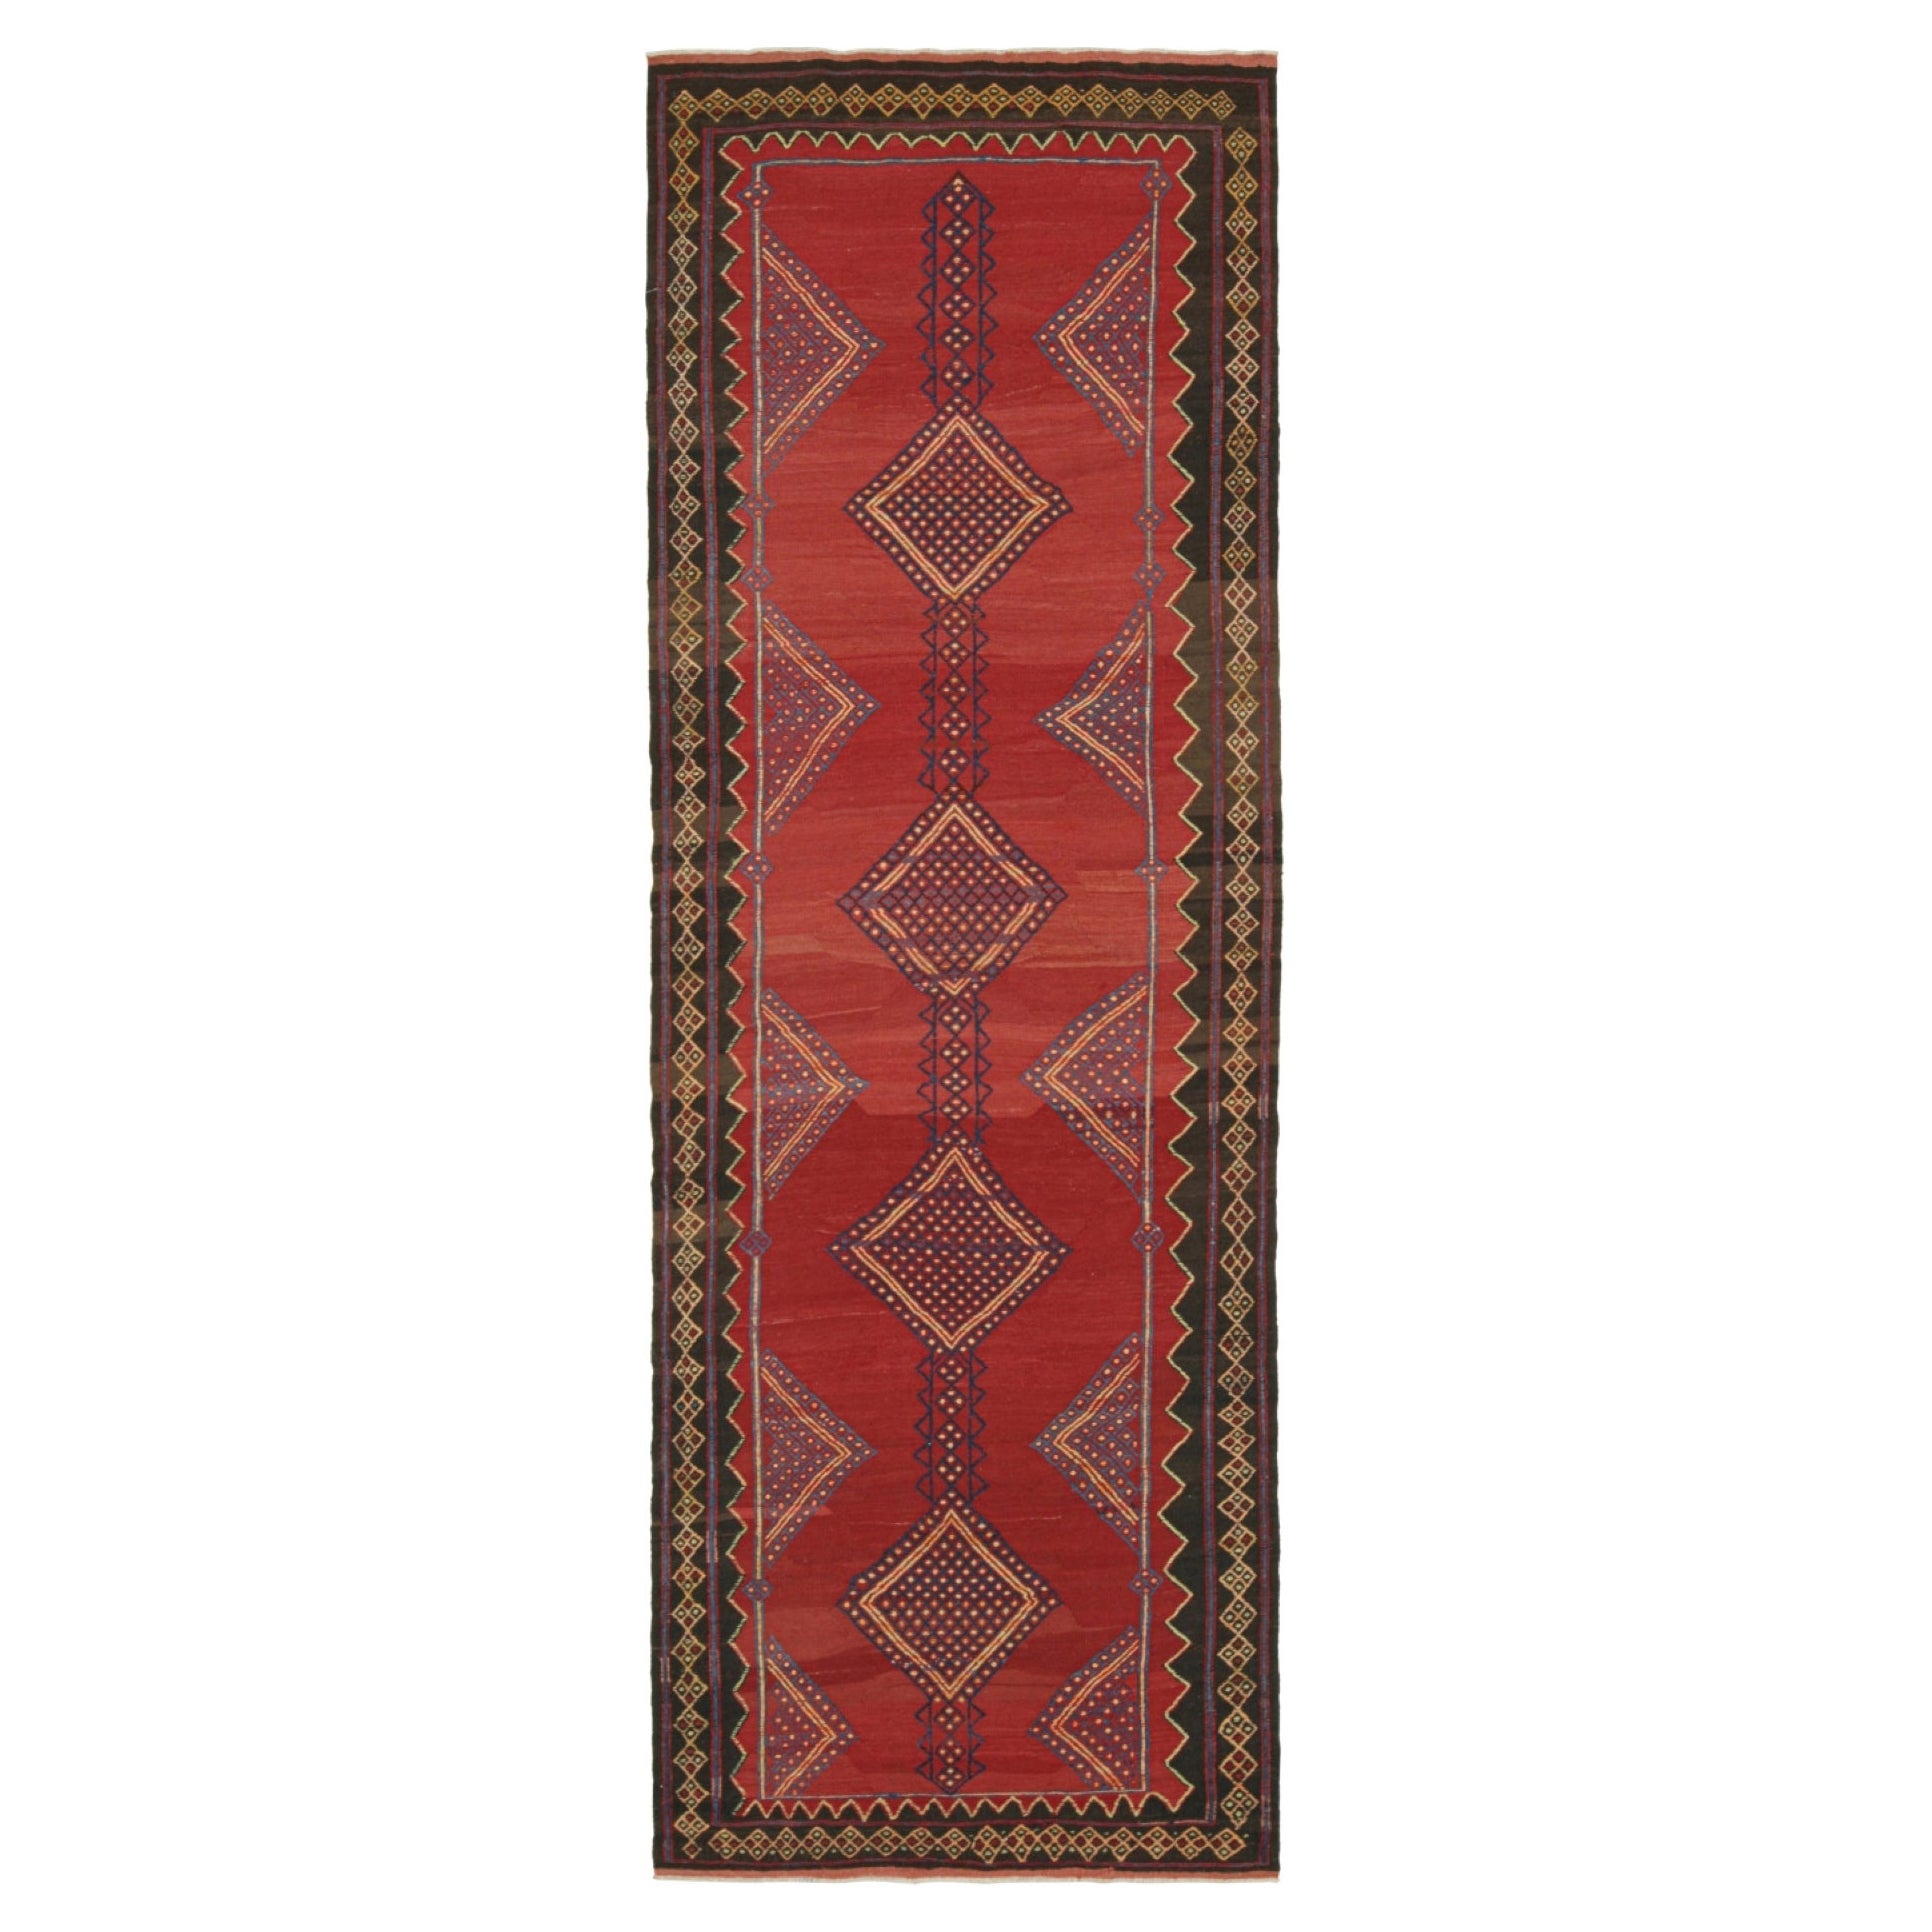 Vintage Persian Kilim in Red with Blue Geometric Patterns